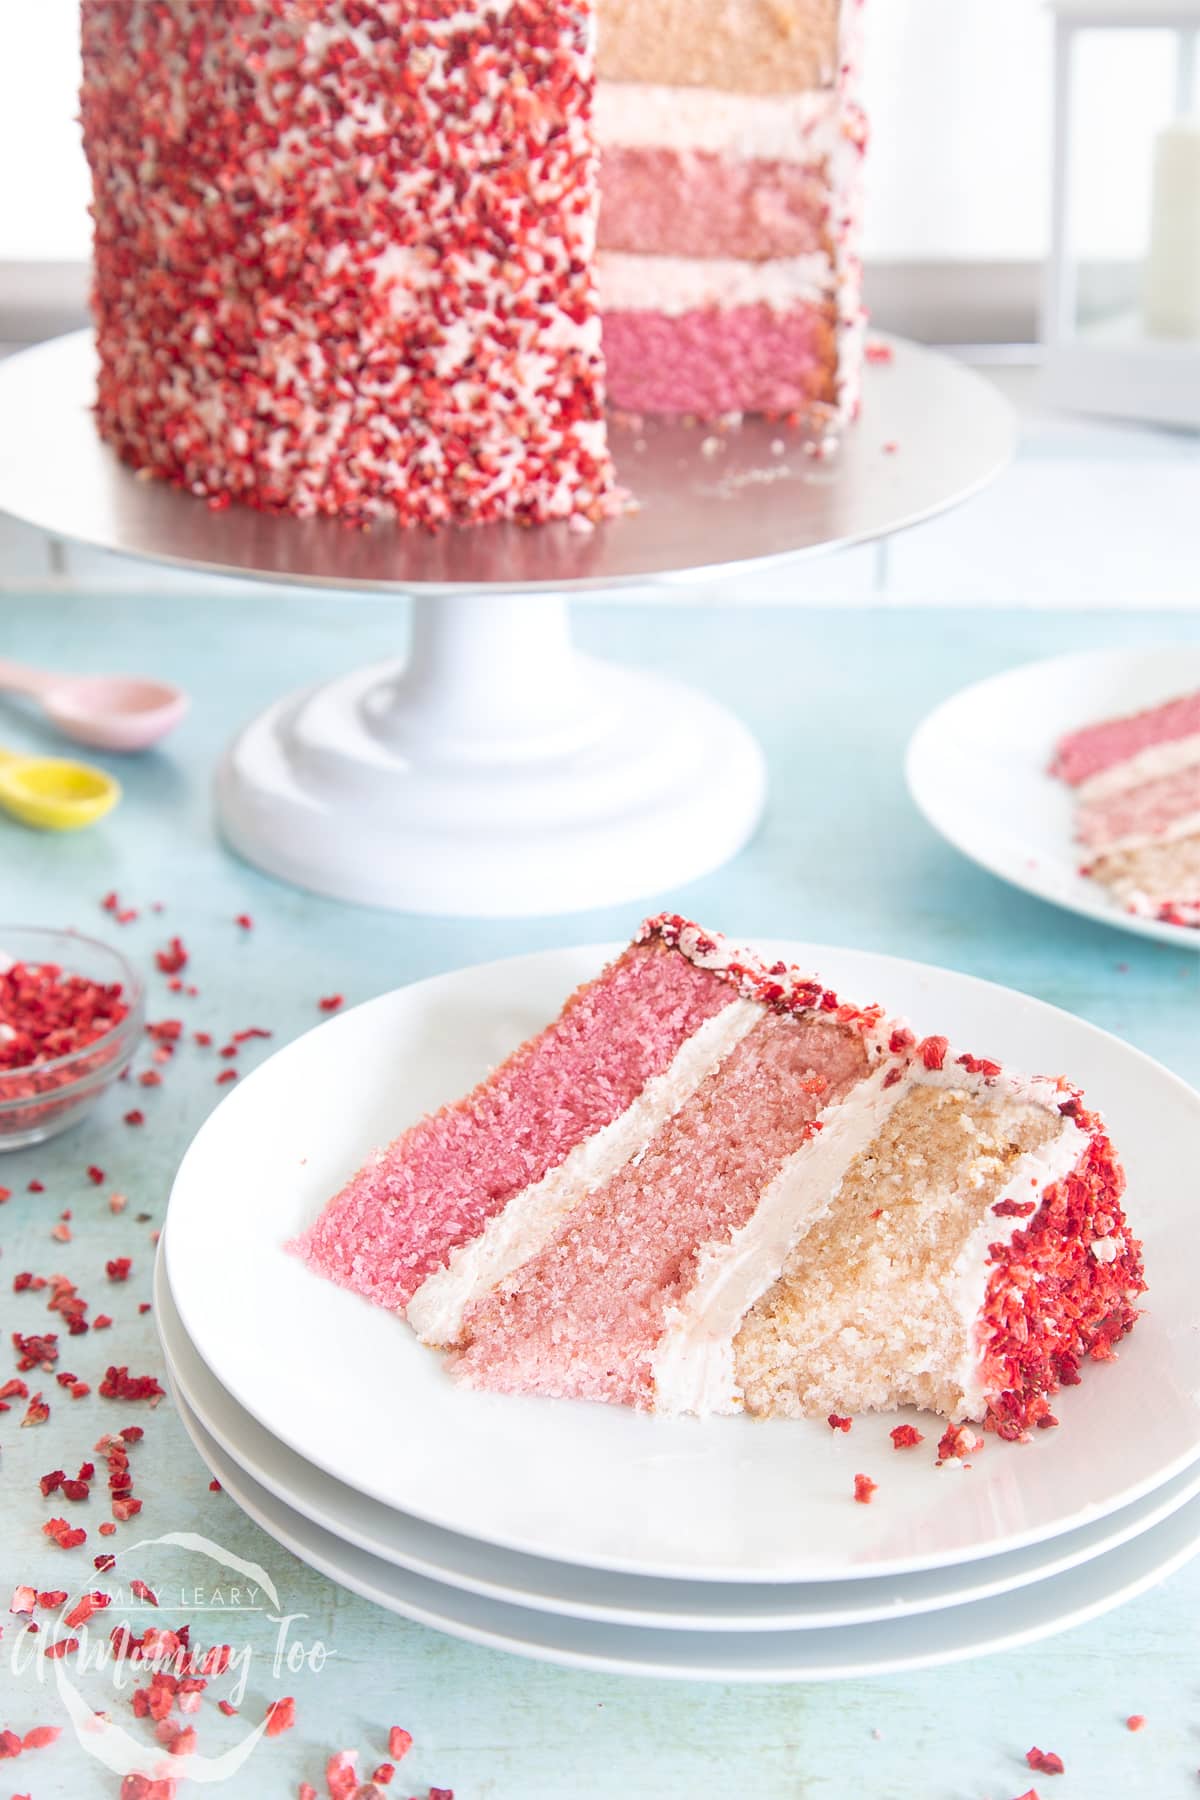 A slice of pink ombre cake on a stack of small white plates. The cake has three layers, each an increasingly intense shade of pink. The sponges are layered with pale pink frosting and the outside is decorated with freeze dried strawberry pieces. A piece of the slice has been cut away.